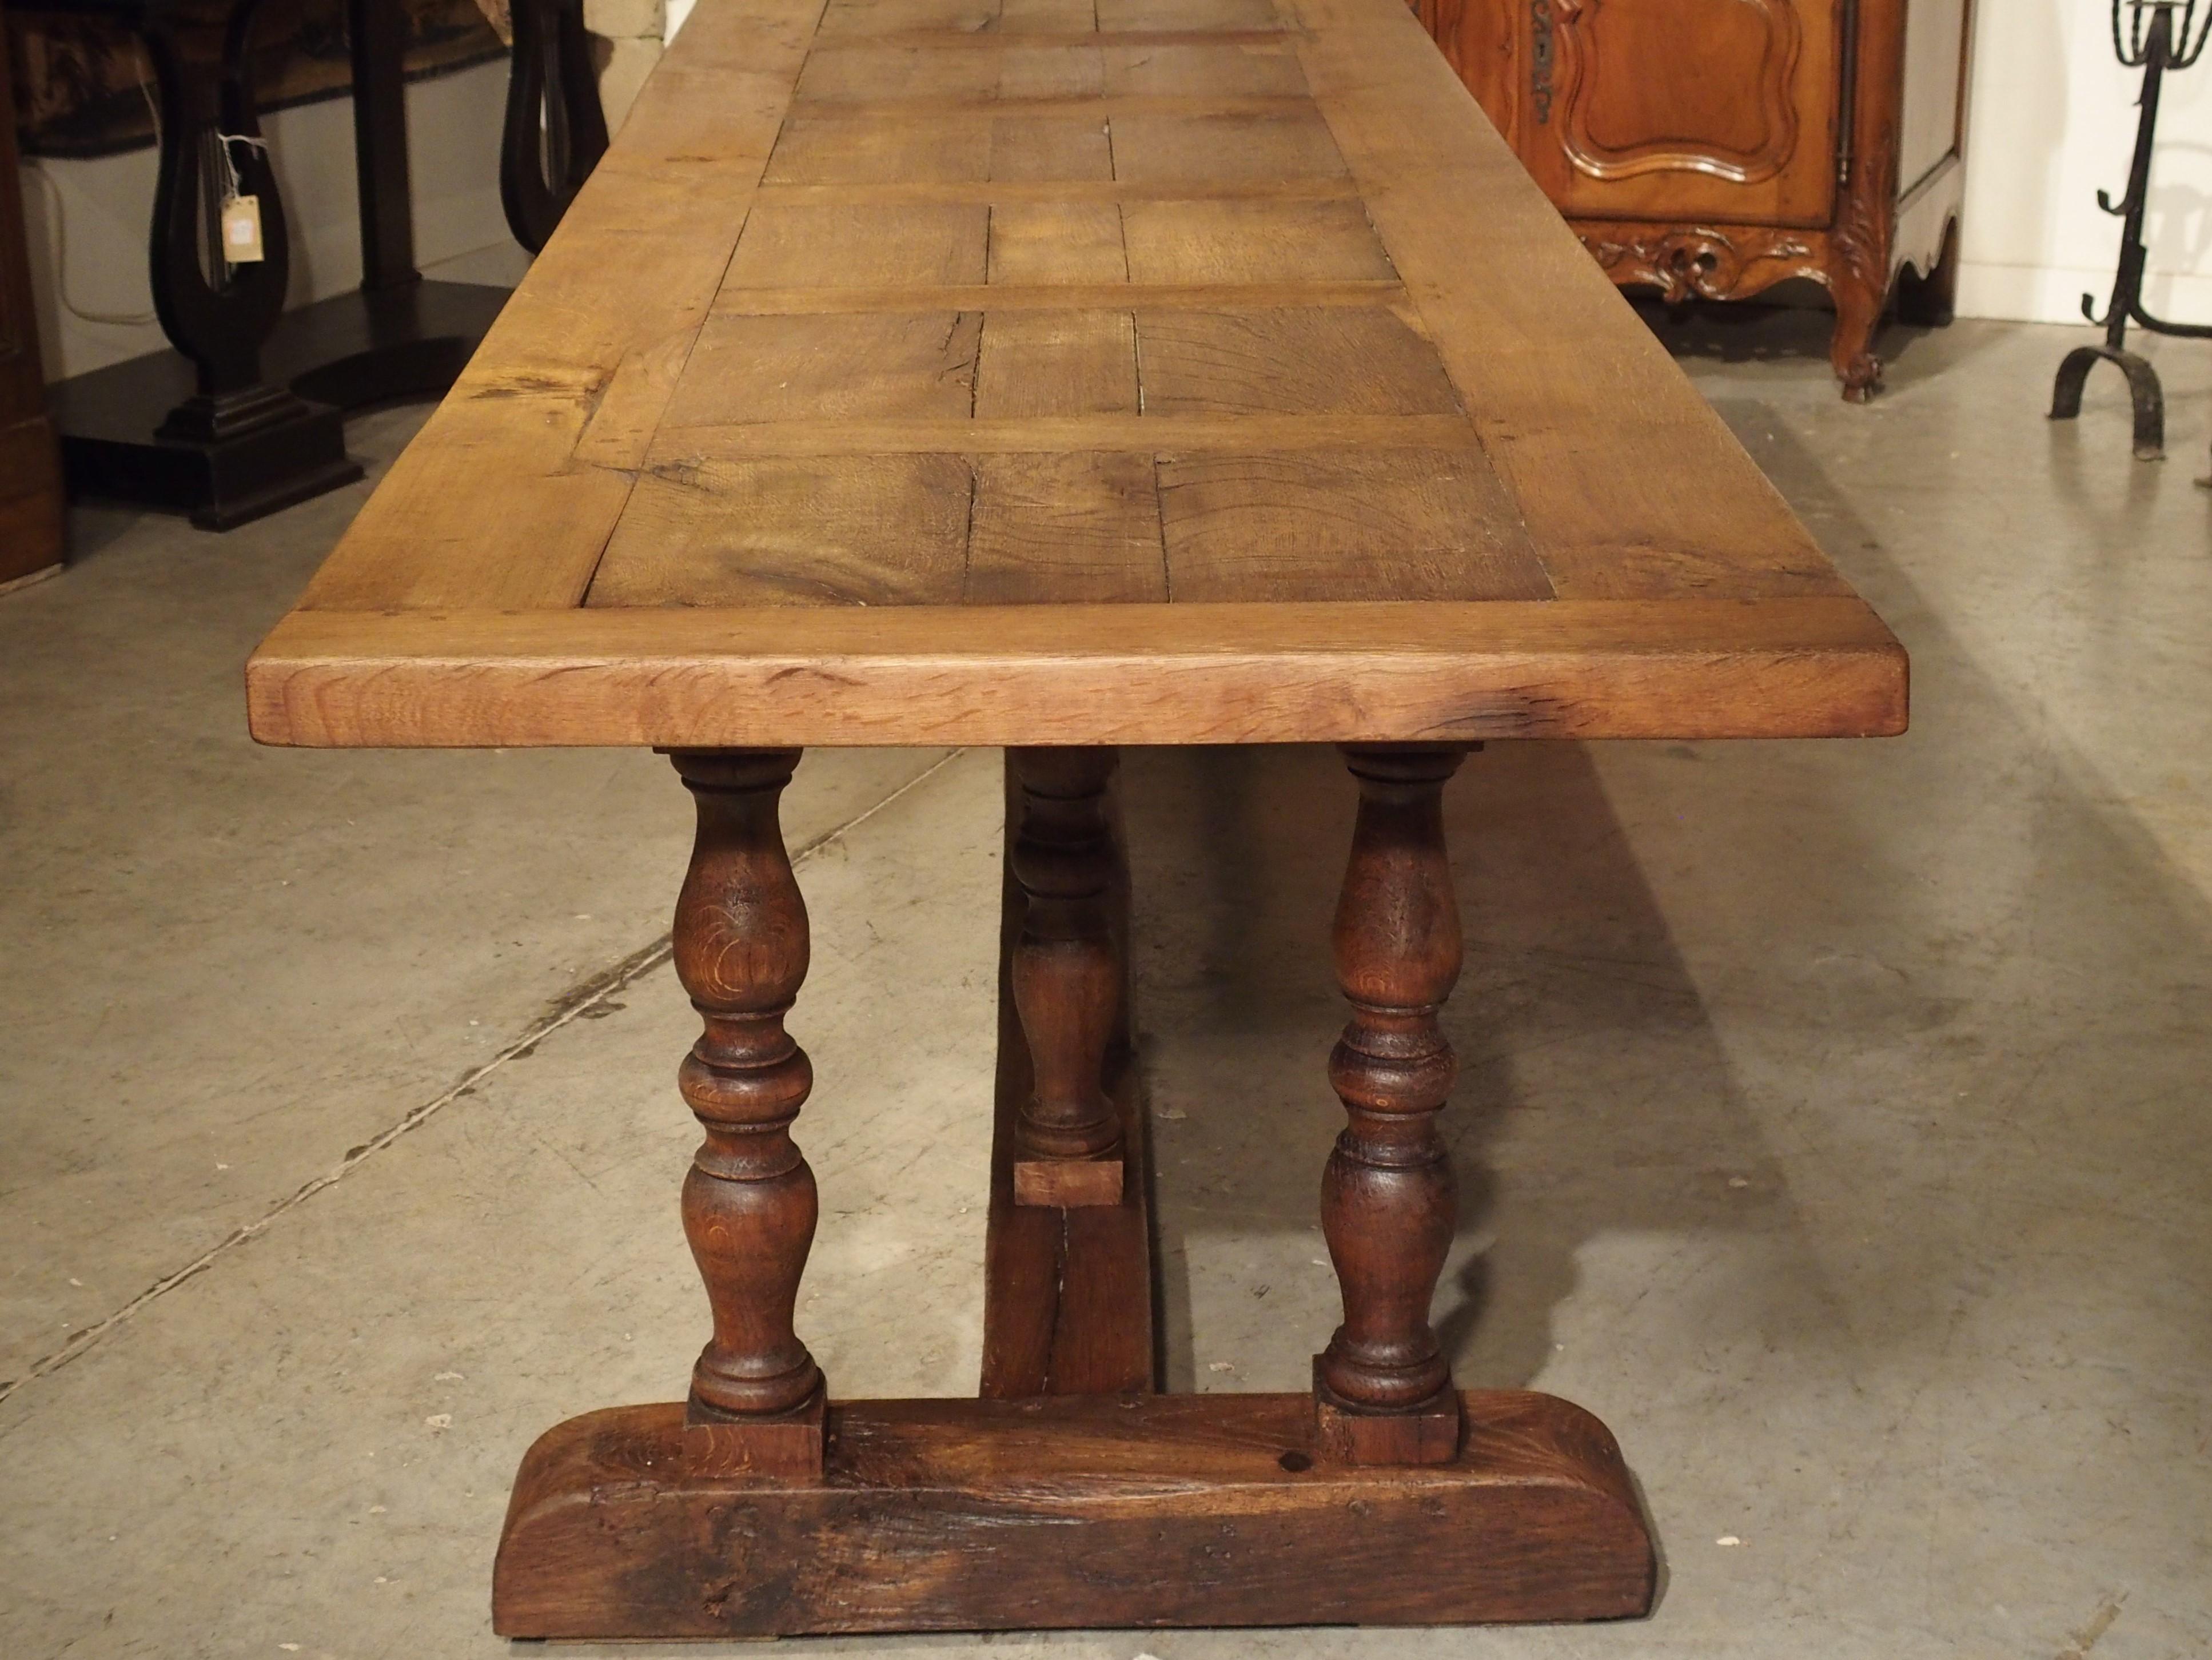 This antique French dining table is constructed of oak and was made in the mid-1800s, probably used in an elegant French Mas. The long top is supported by 2 balusters at each end and 3 balusters along the center beam stretcher. The legs at either